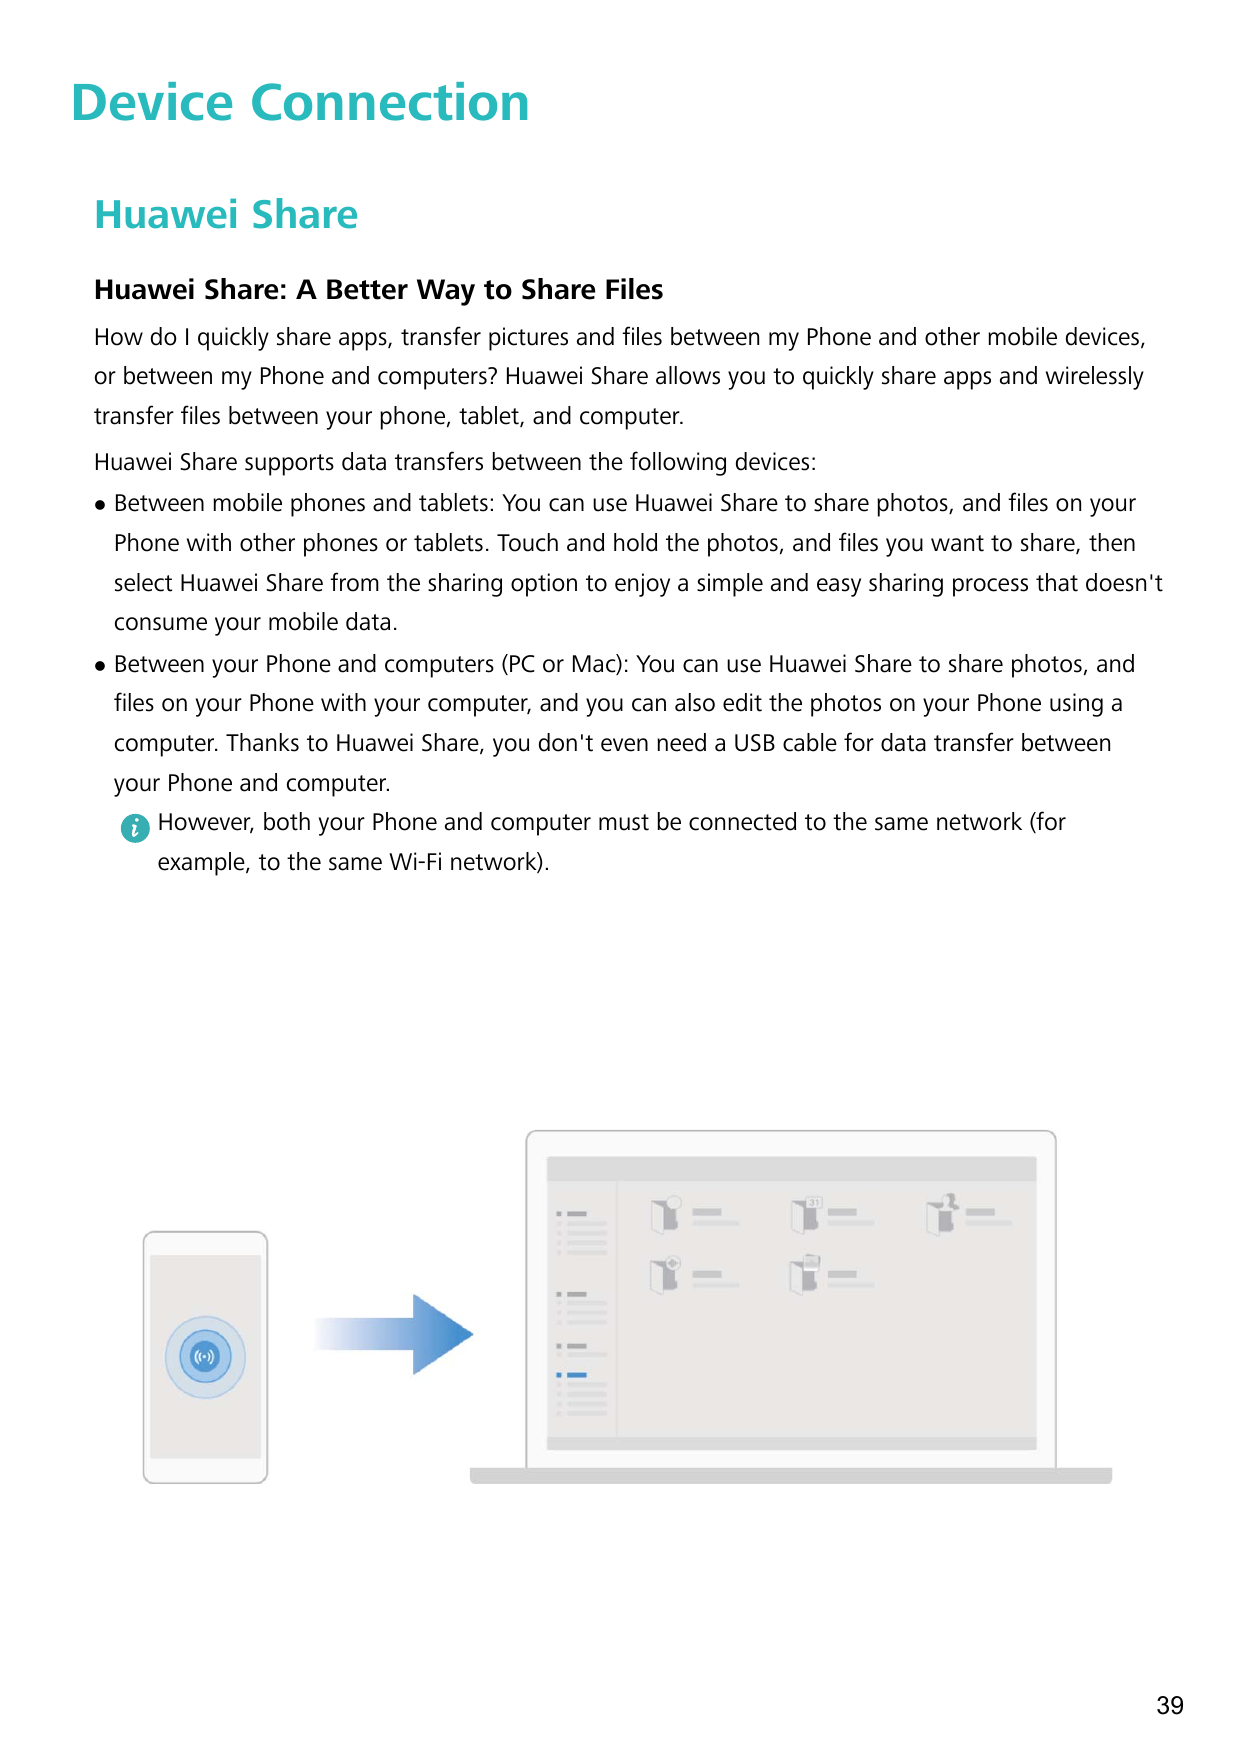 Device ConnectionHuawei ShareHuawei Share: A Better Way to Share FilesHow do I quickly share apps, transfer pictures and files b